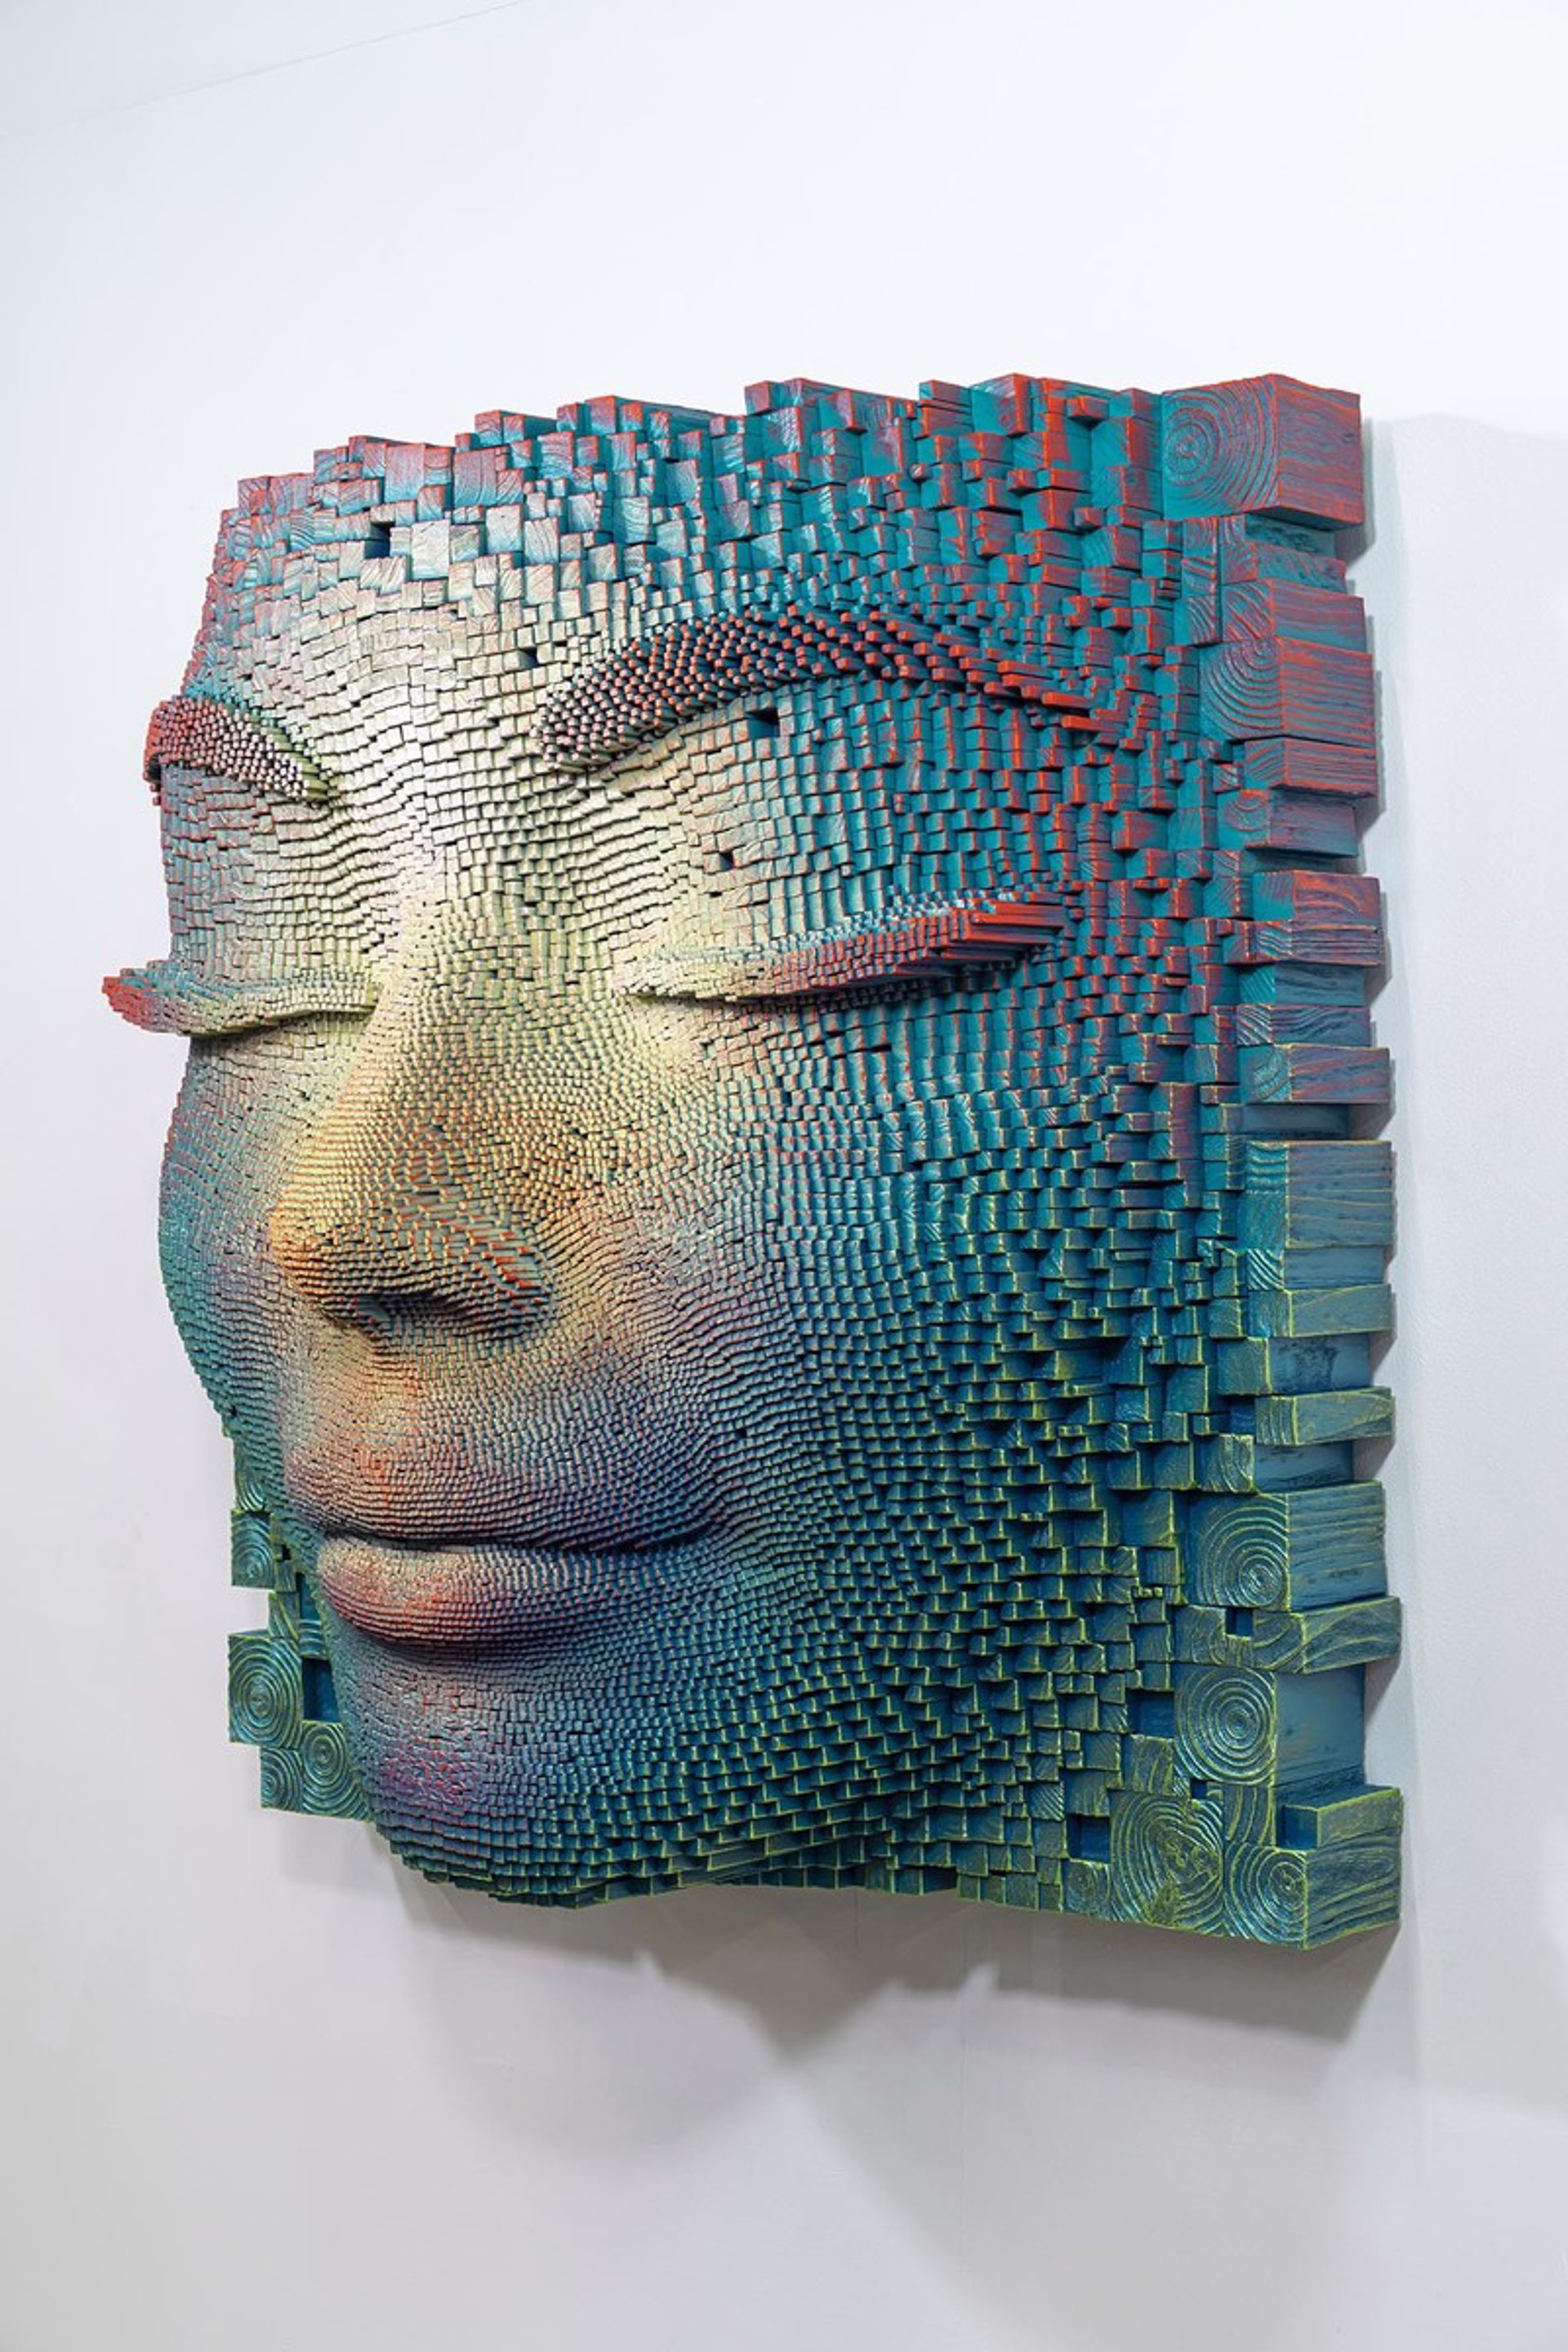 Mask #264 by Gil Bruvel